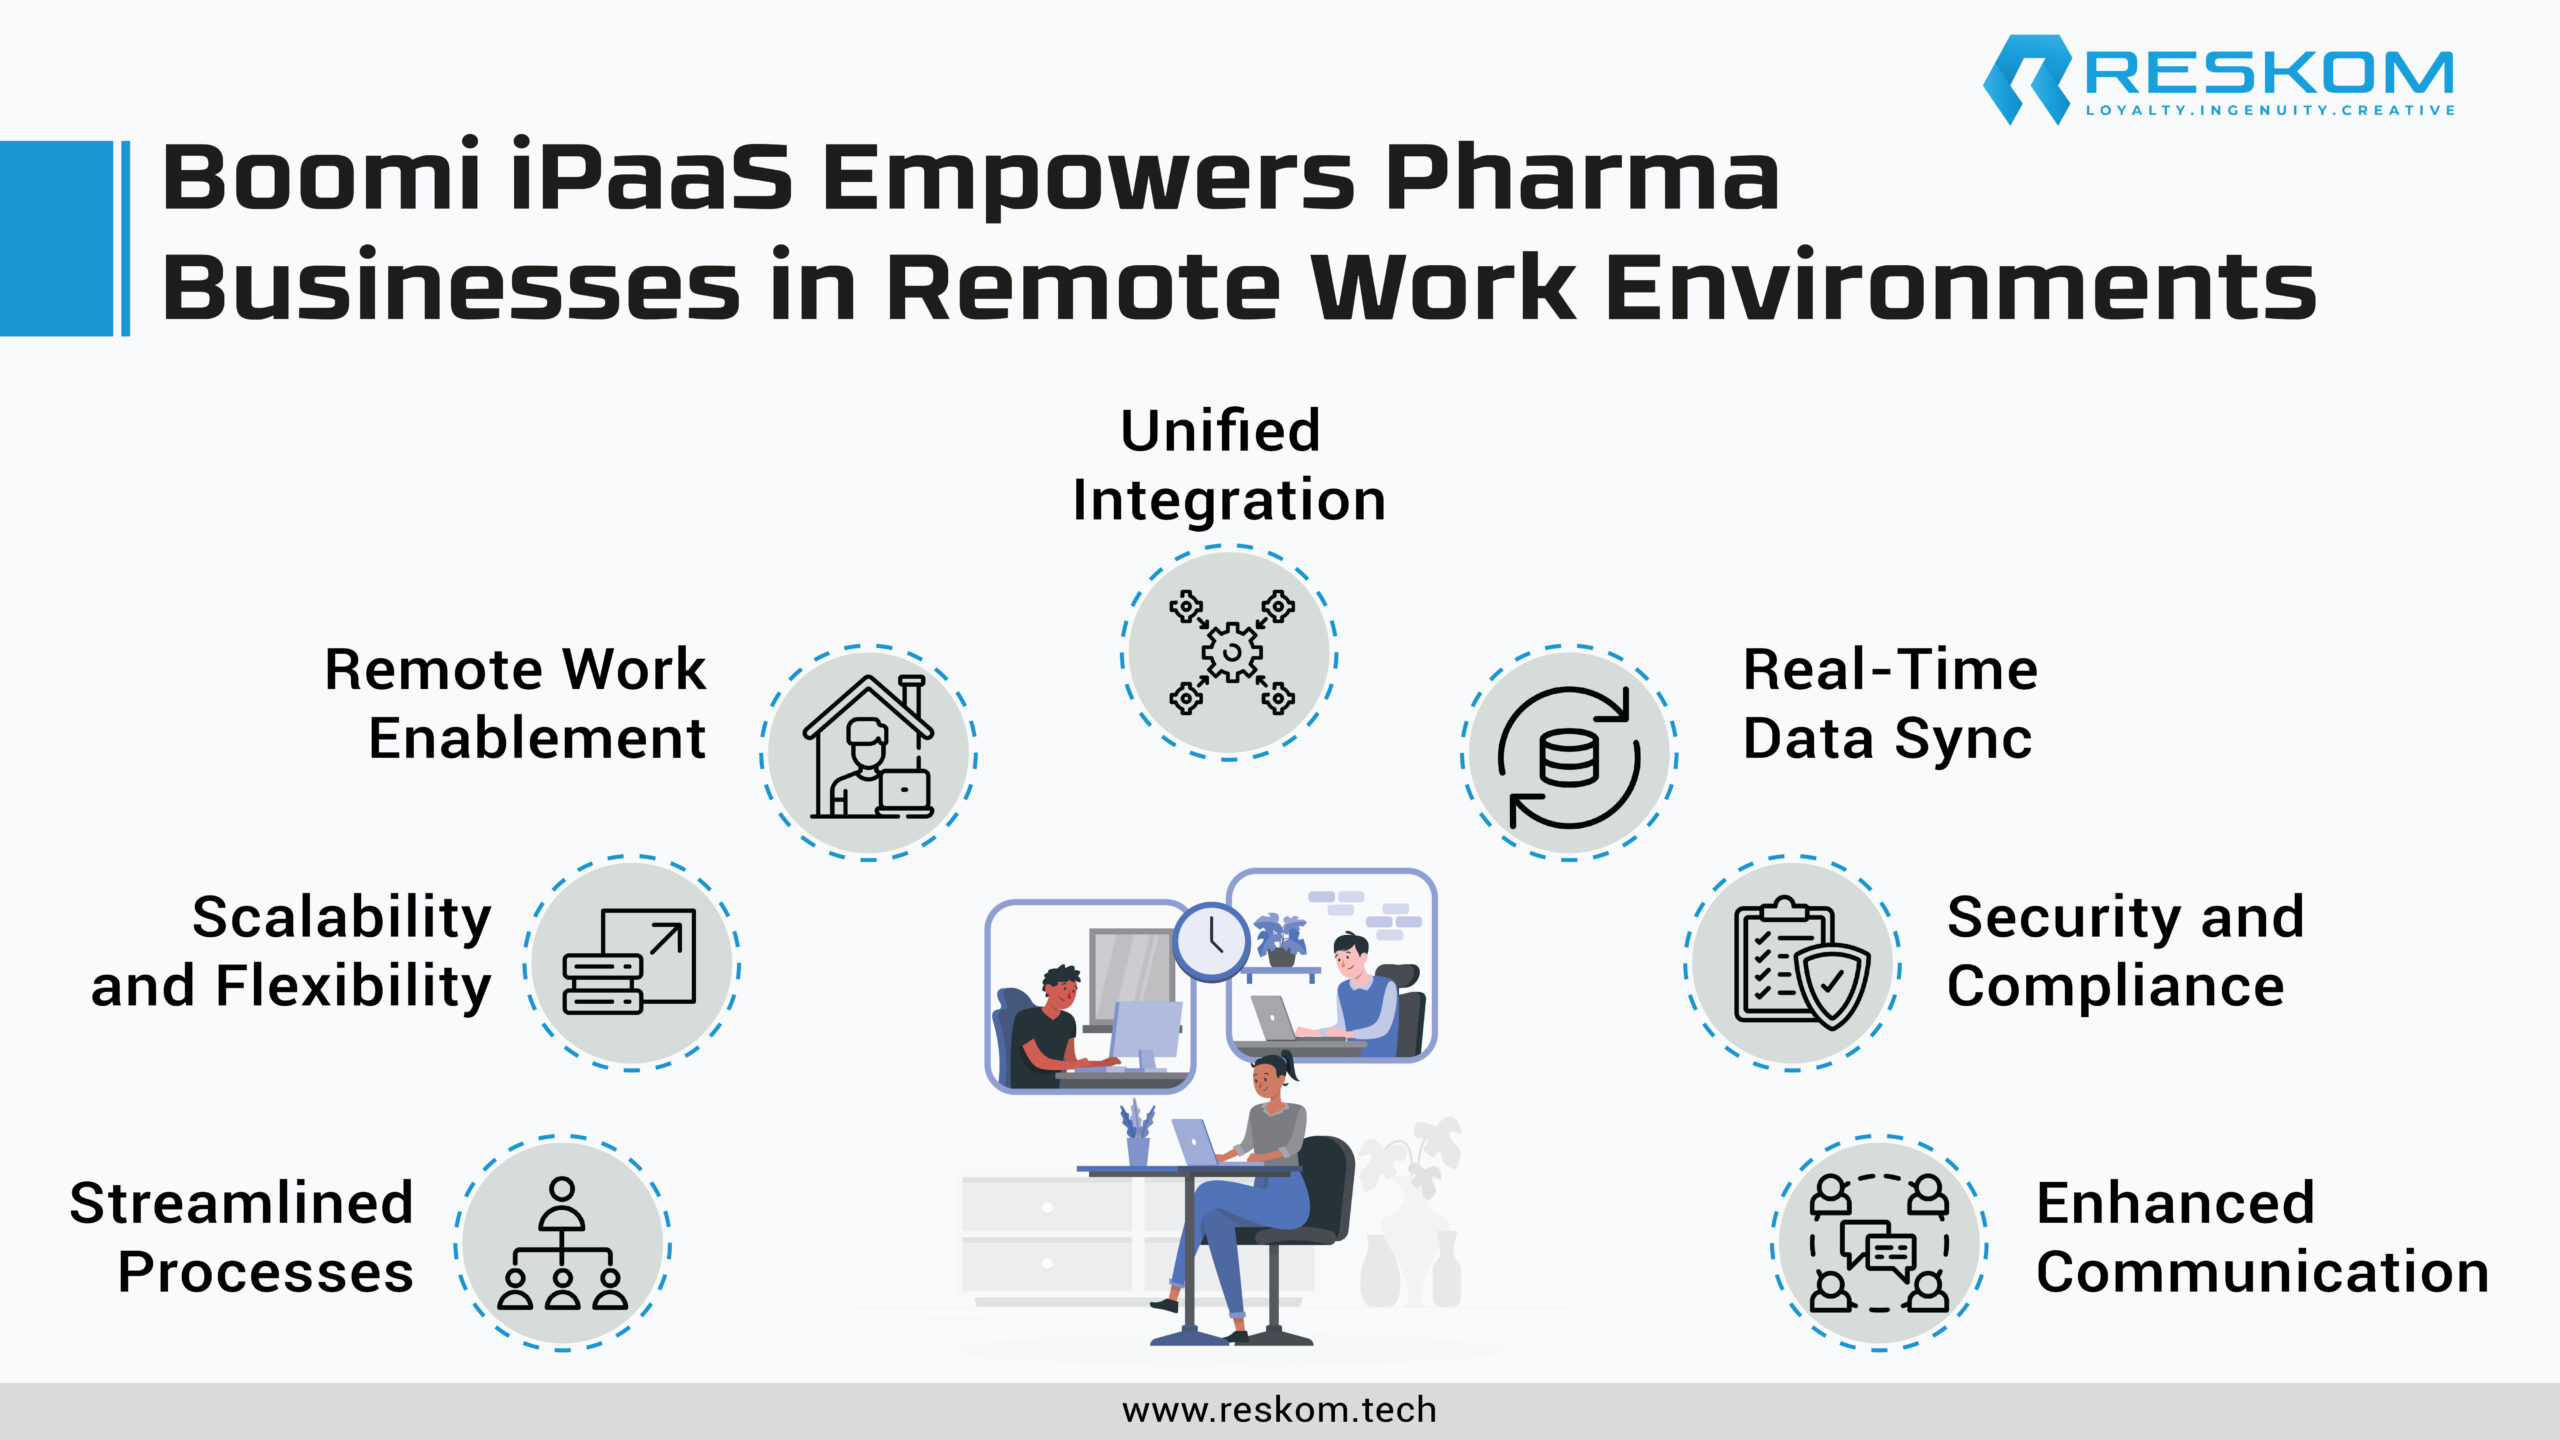 oomi iPaaS Empowers Pharma Businesses in Remote Work Environments-01-01